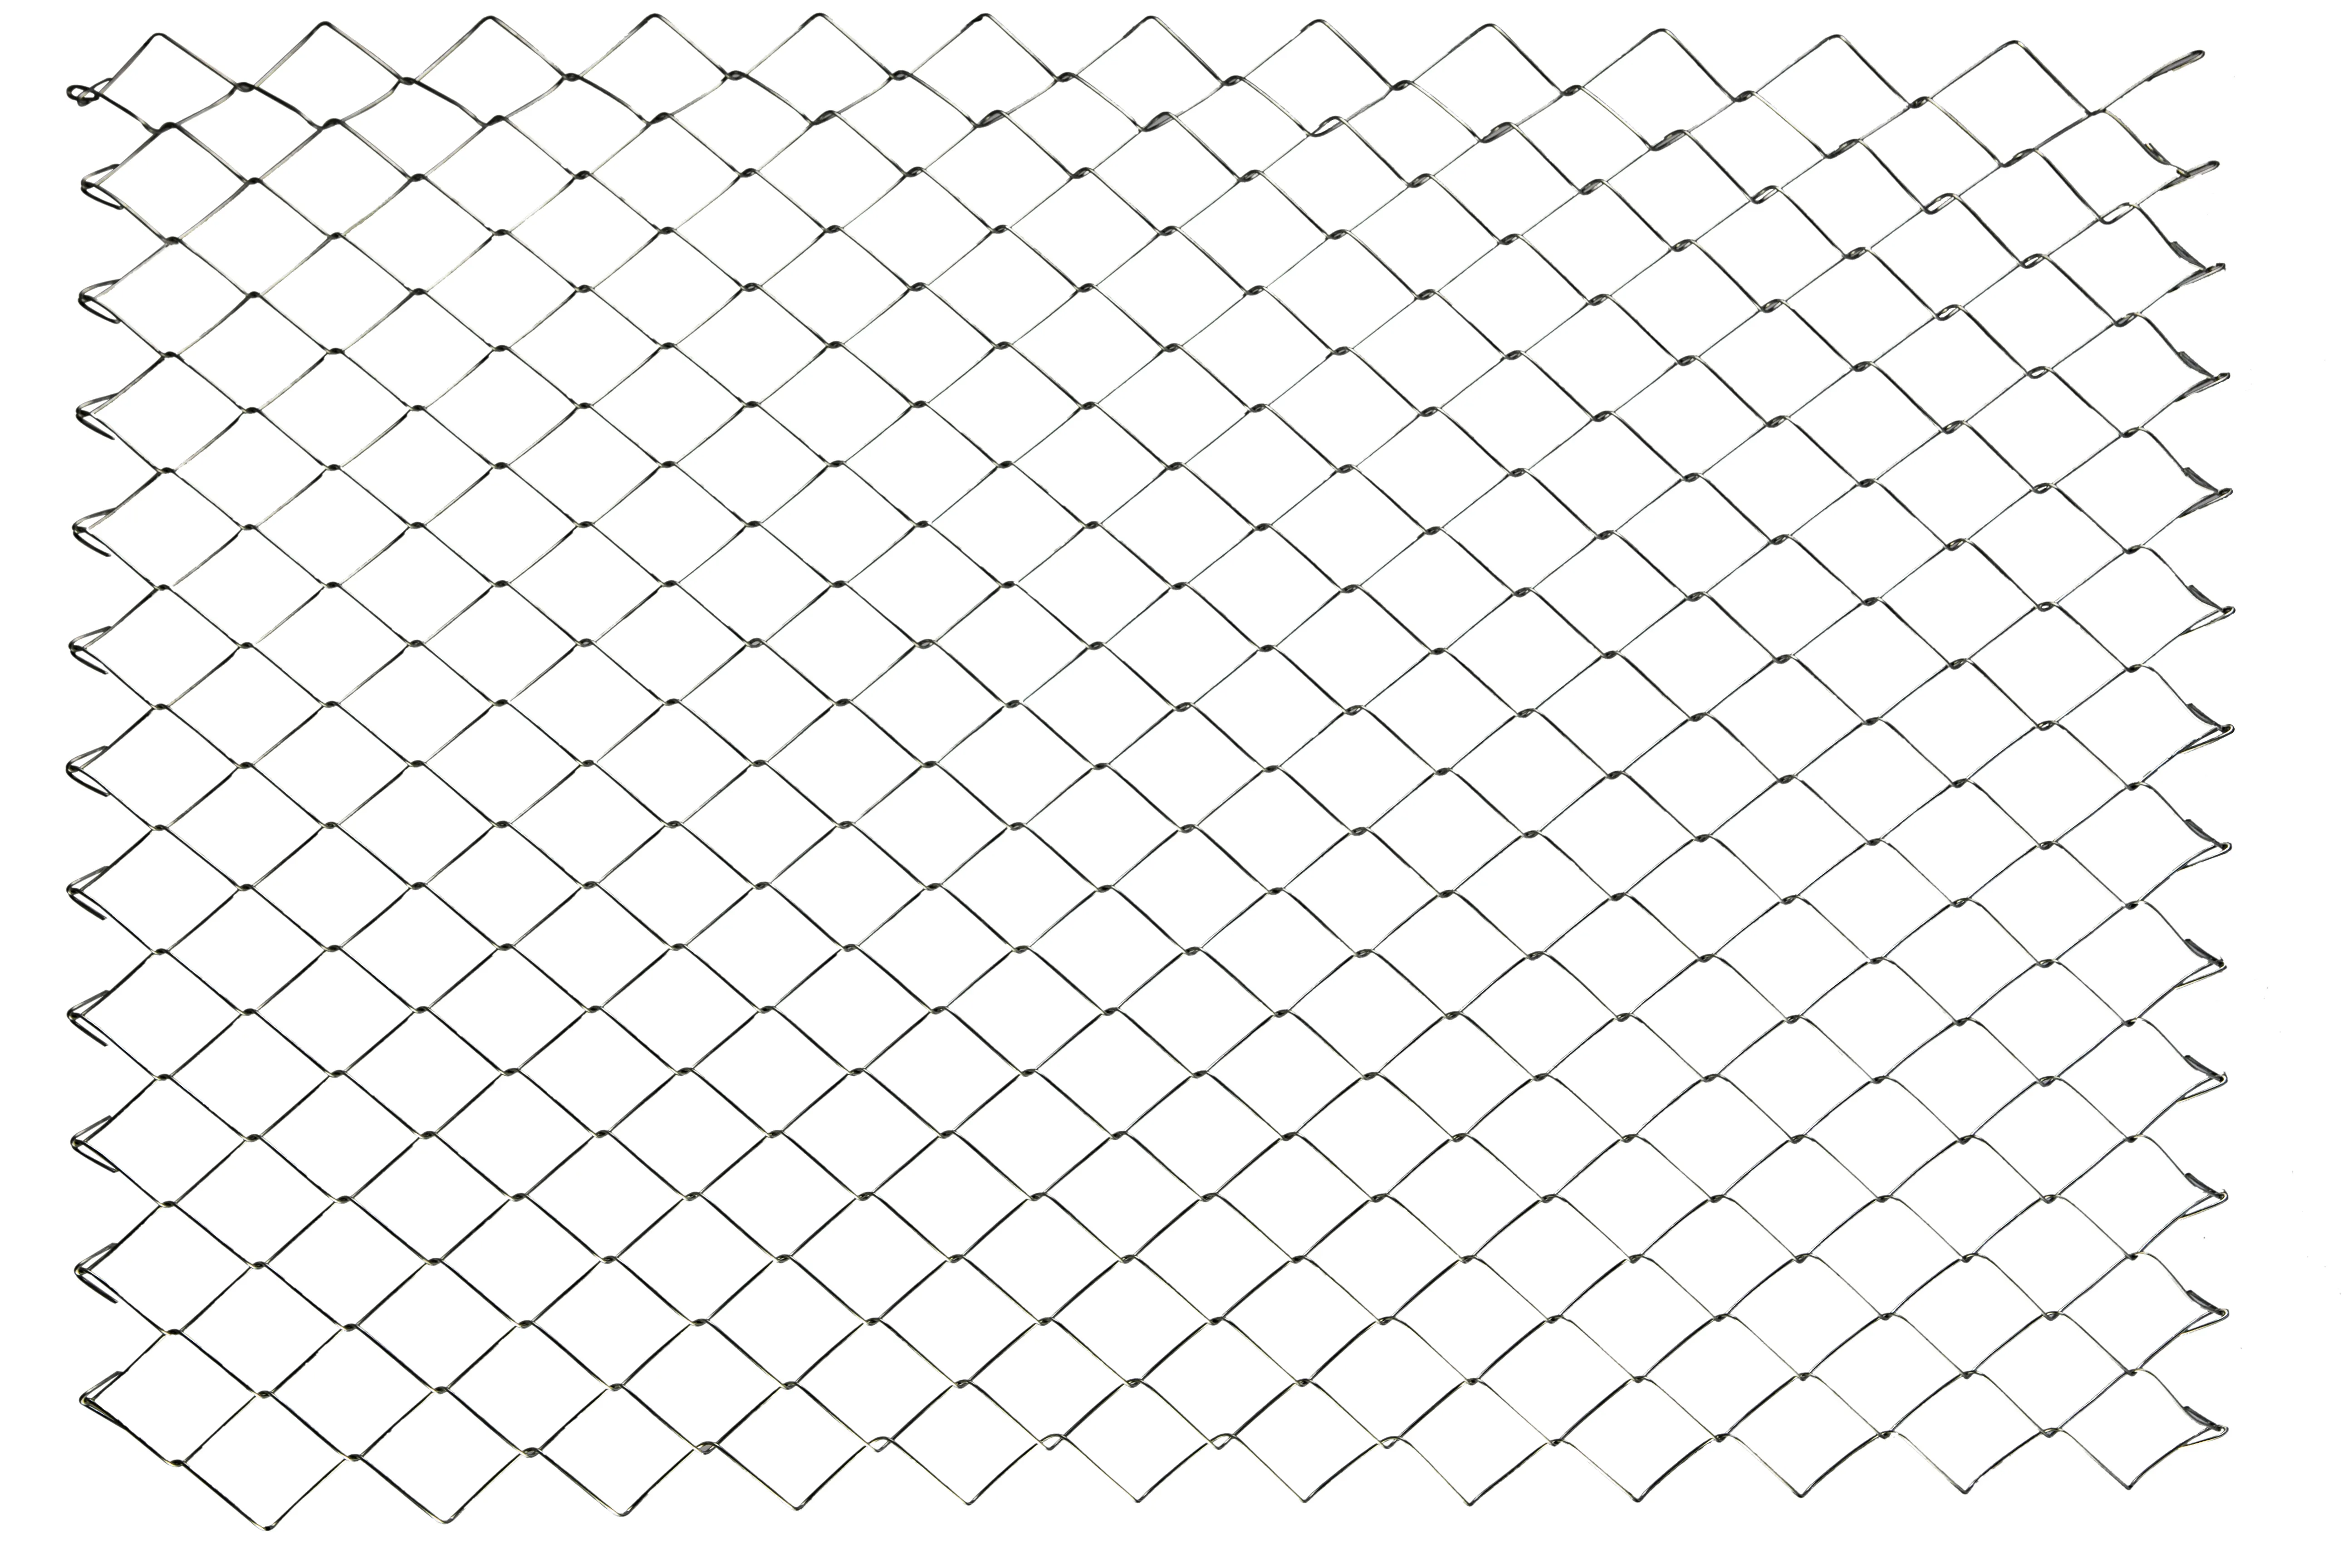 China Gao'an Homestead Basketball Yard Fence supplier PVC Coated or Galvanized Wire Fence